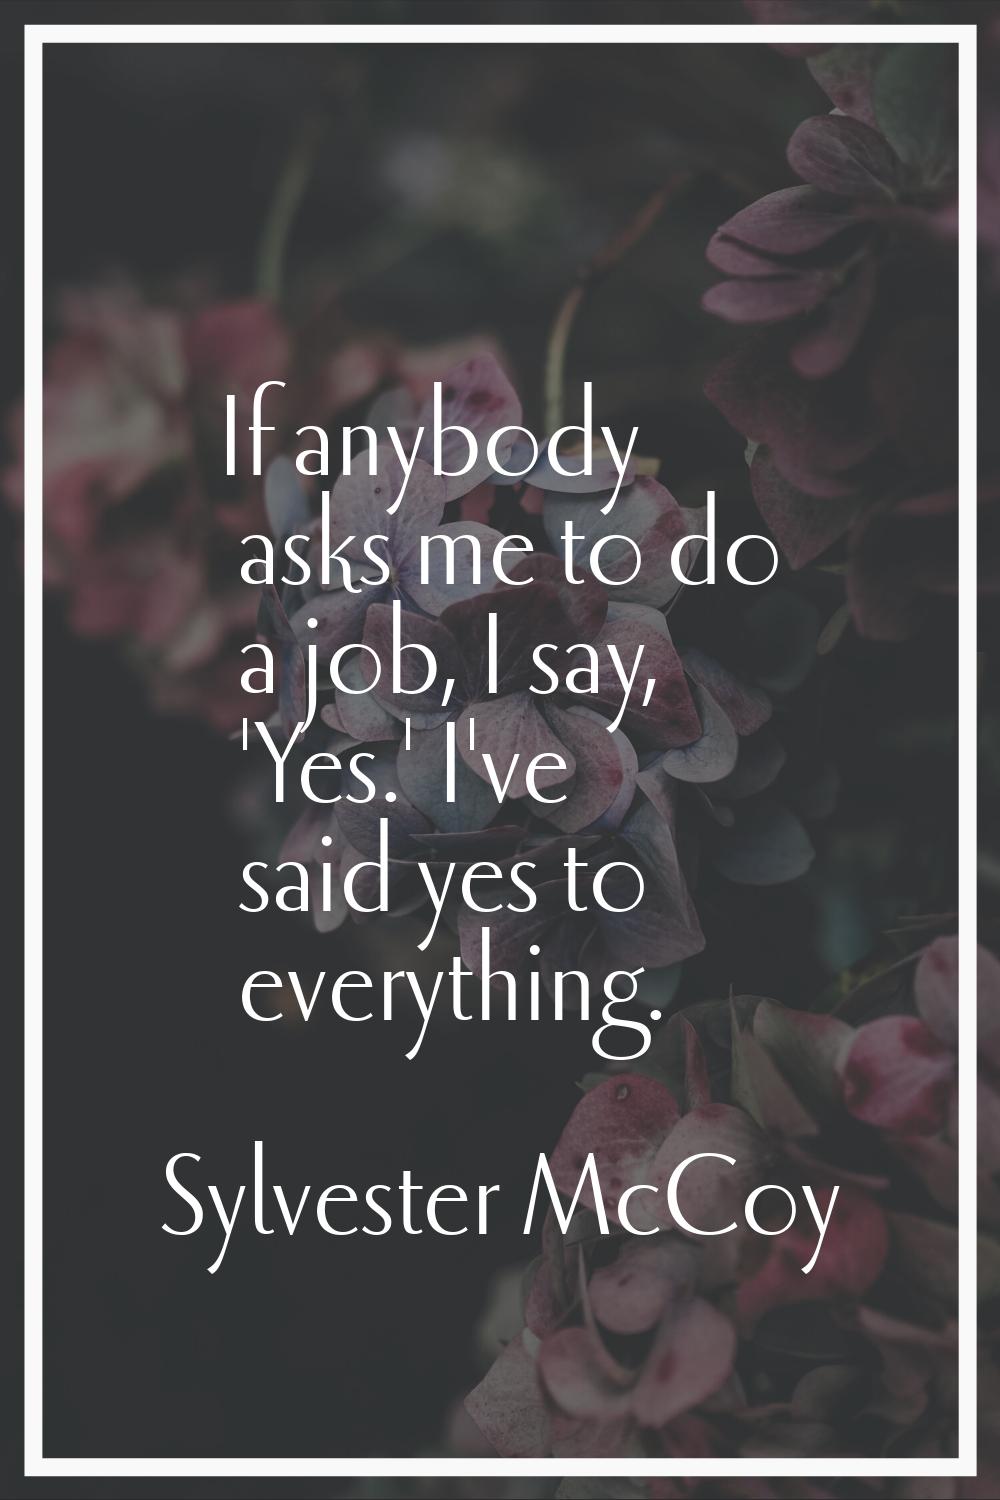 If anybody asks me to do a job, I say, 'Yes.' I've said yes to everything.